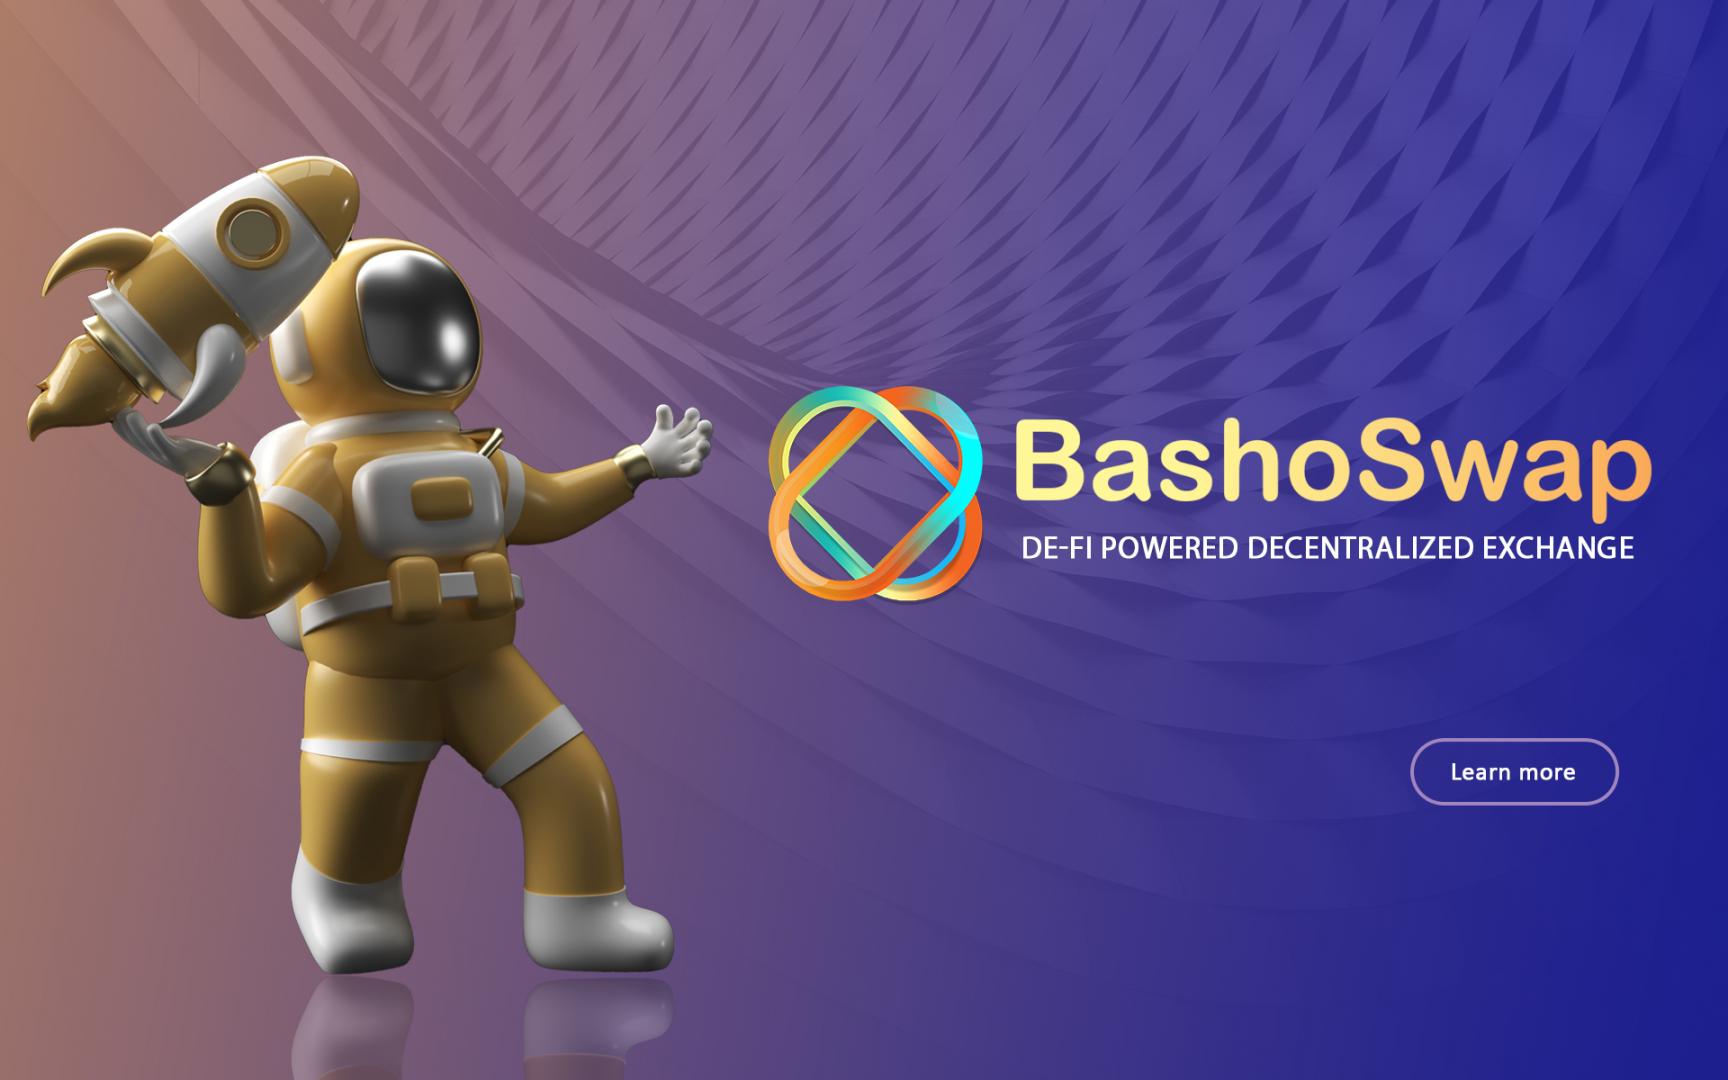 Bashoswap Readies For AMA On Cardanodaily Ahead Of $Bash Initial Sale Round 4